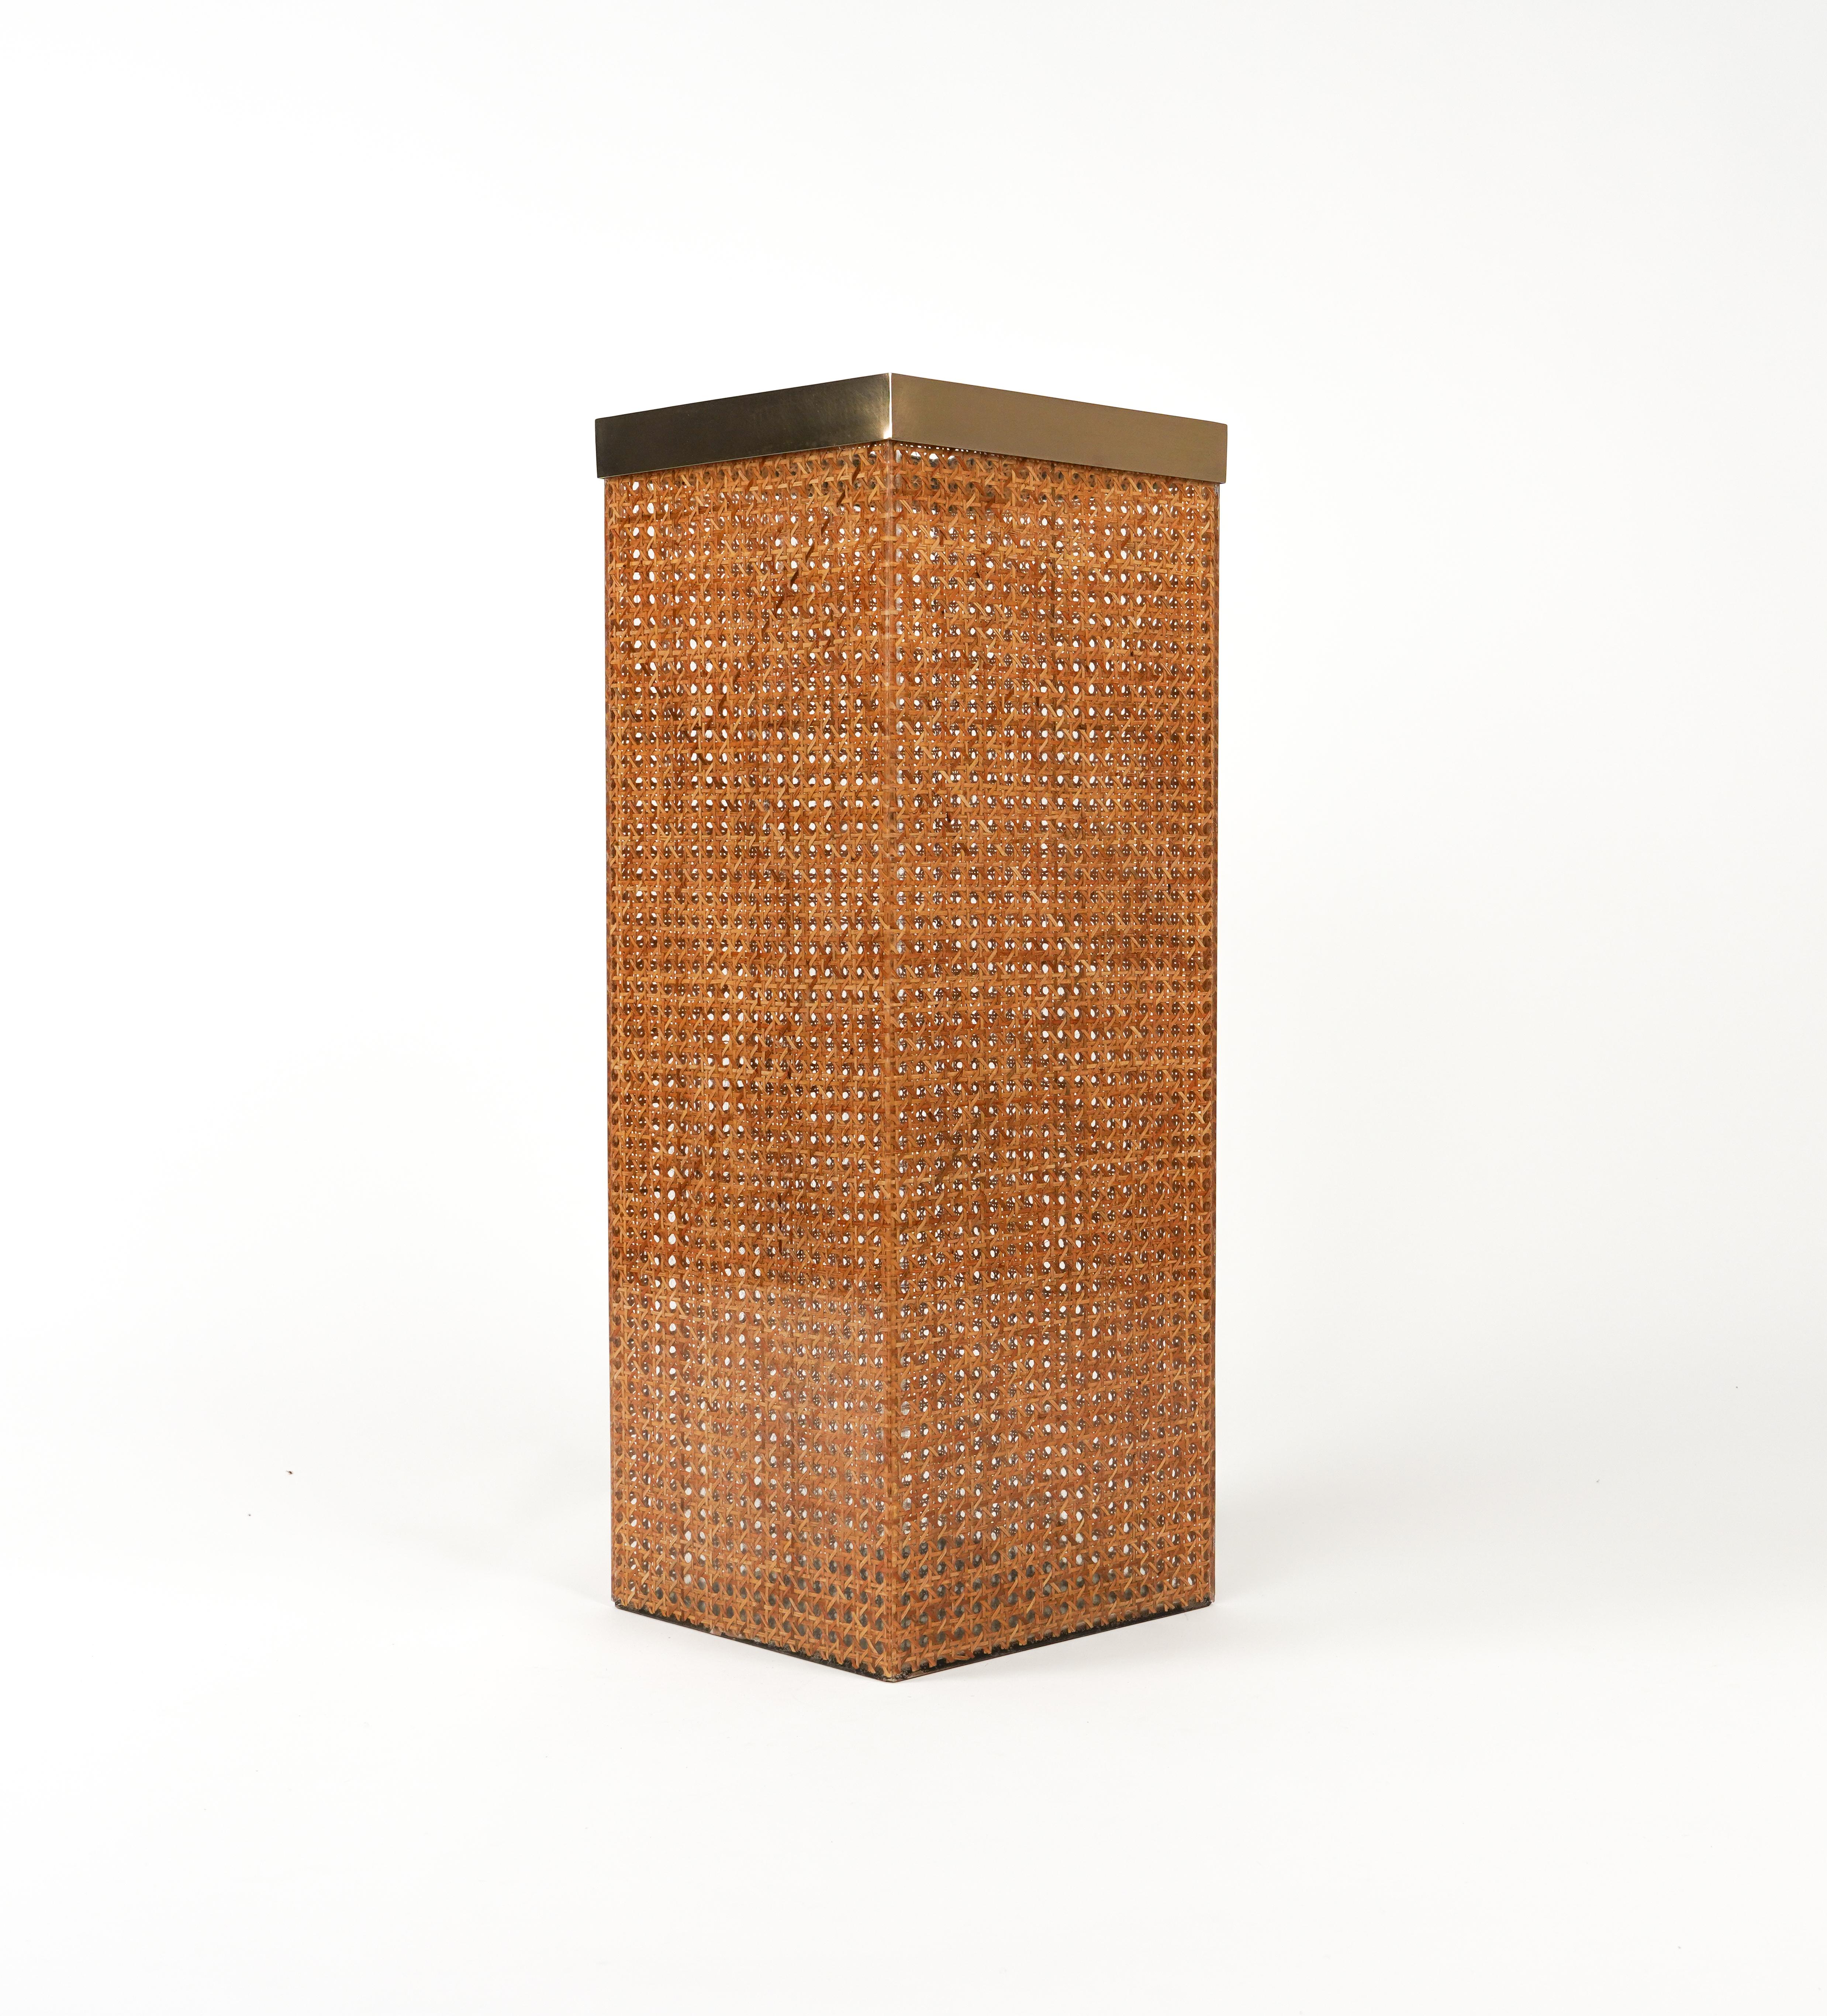 Umbrella Stand in Lucite, Rattan and Brass Christian Dior Style, Italy 1970s For Sale 1